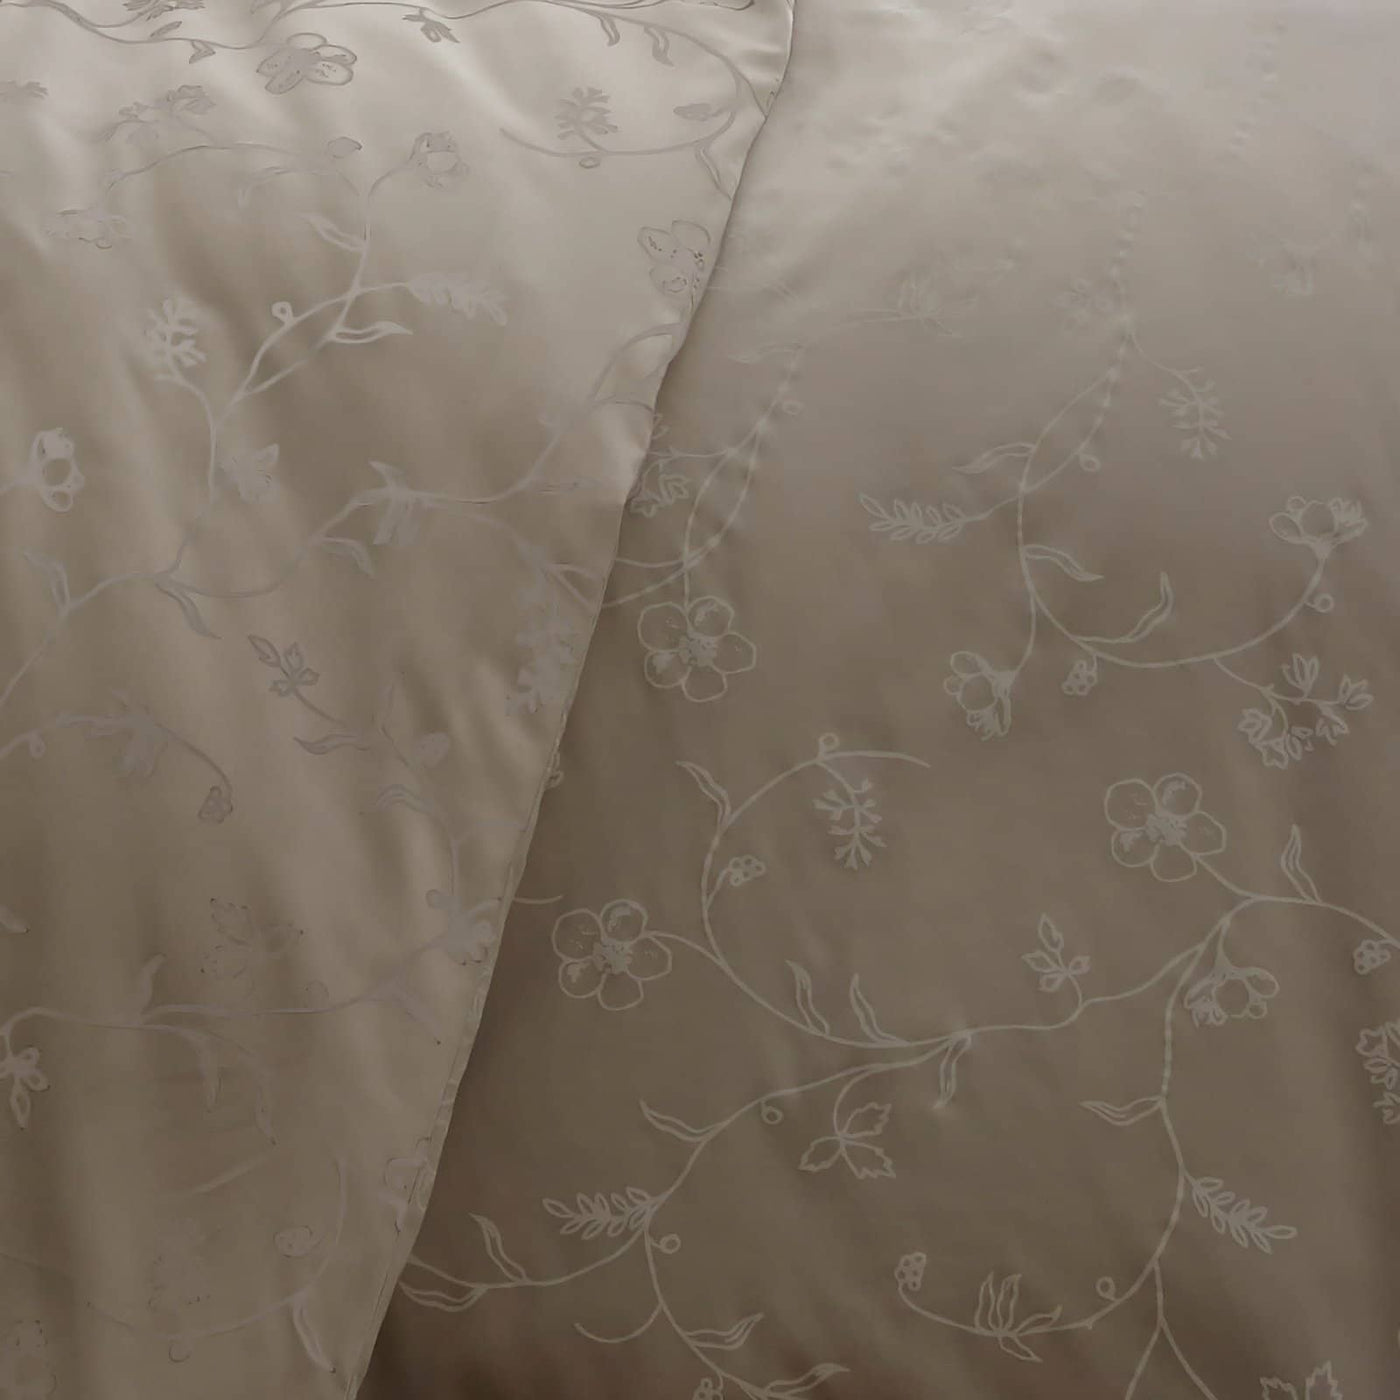 Details and Print Pattern of Sweetbrier Duvet Cover Set in Soft Sand with White Flowers#color_sweetbrier-soft-sand-with-white-flowers